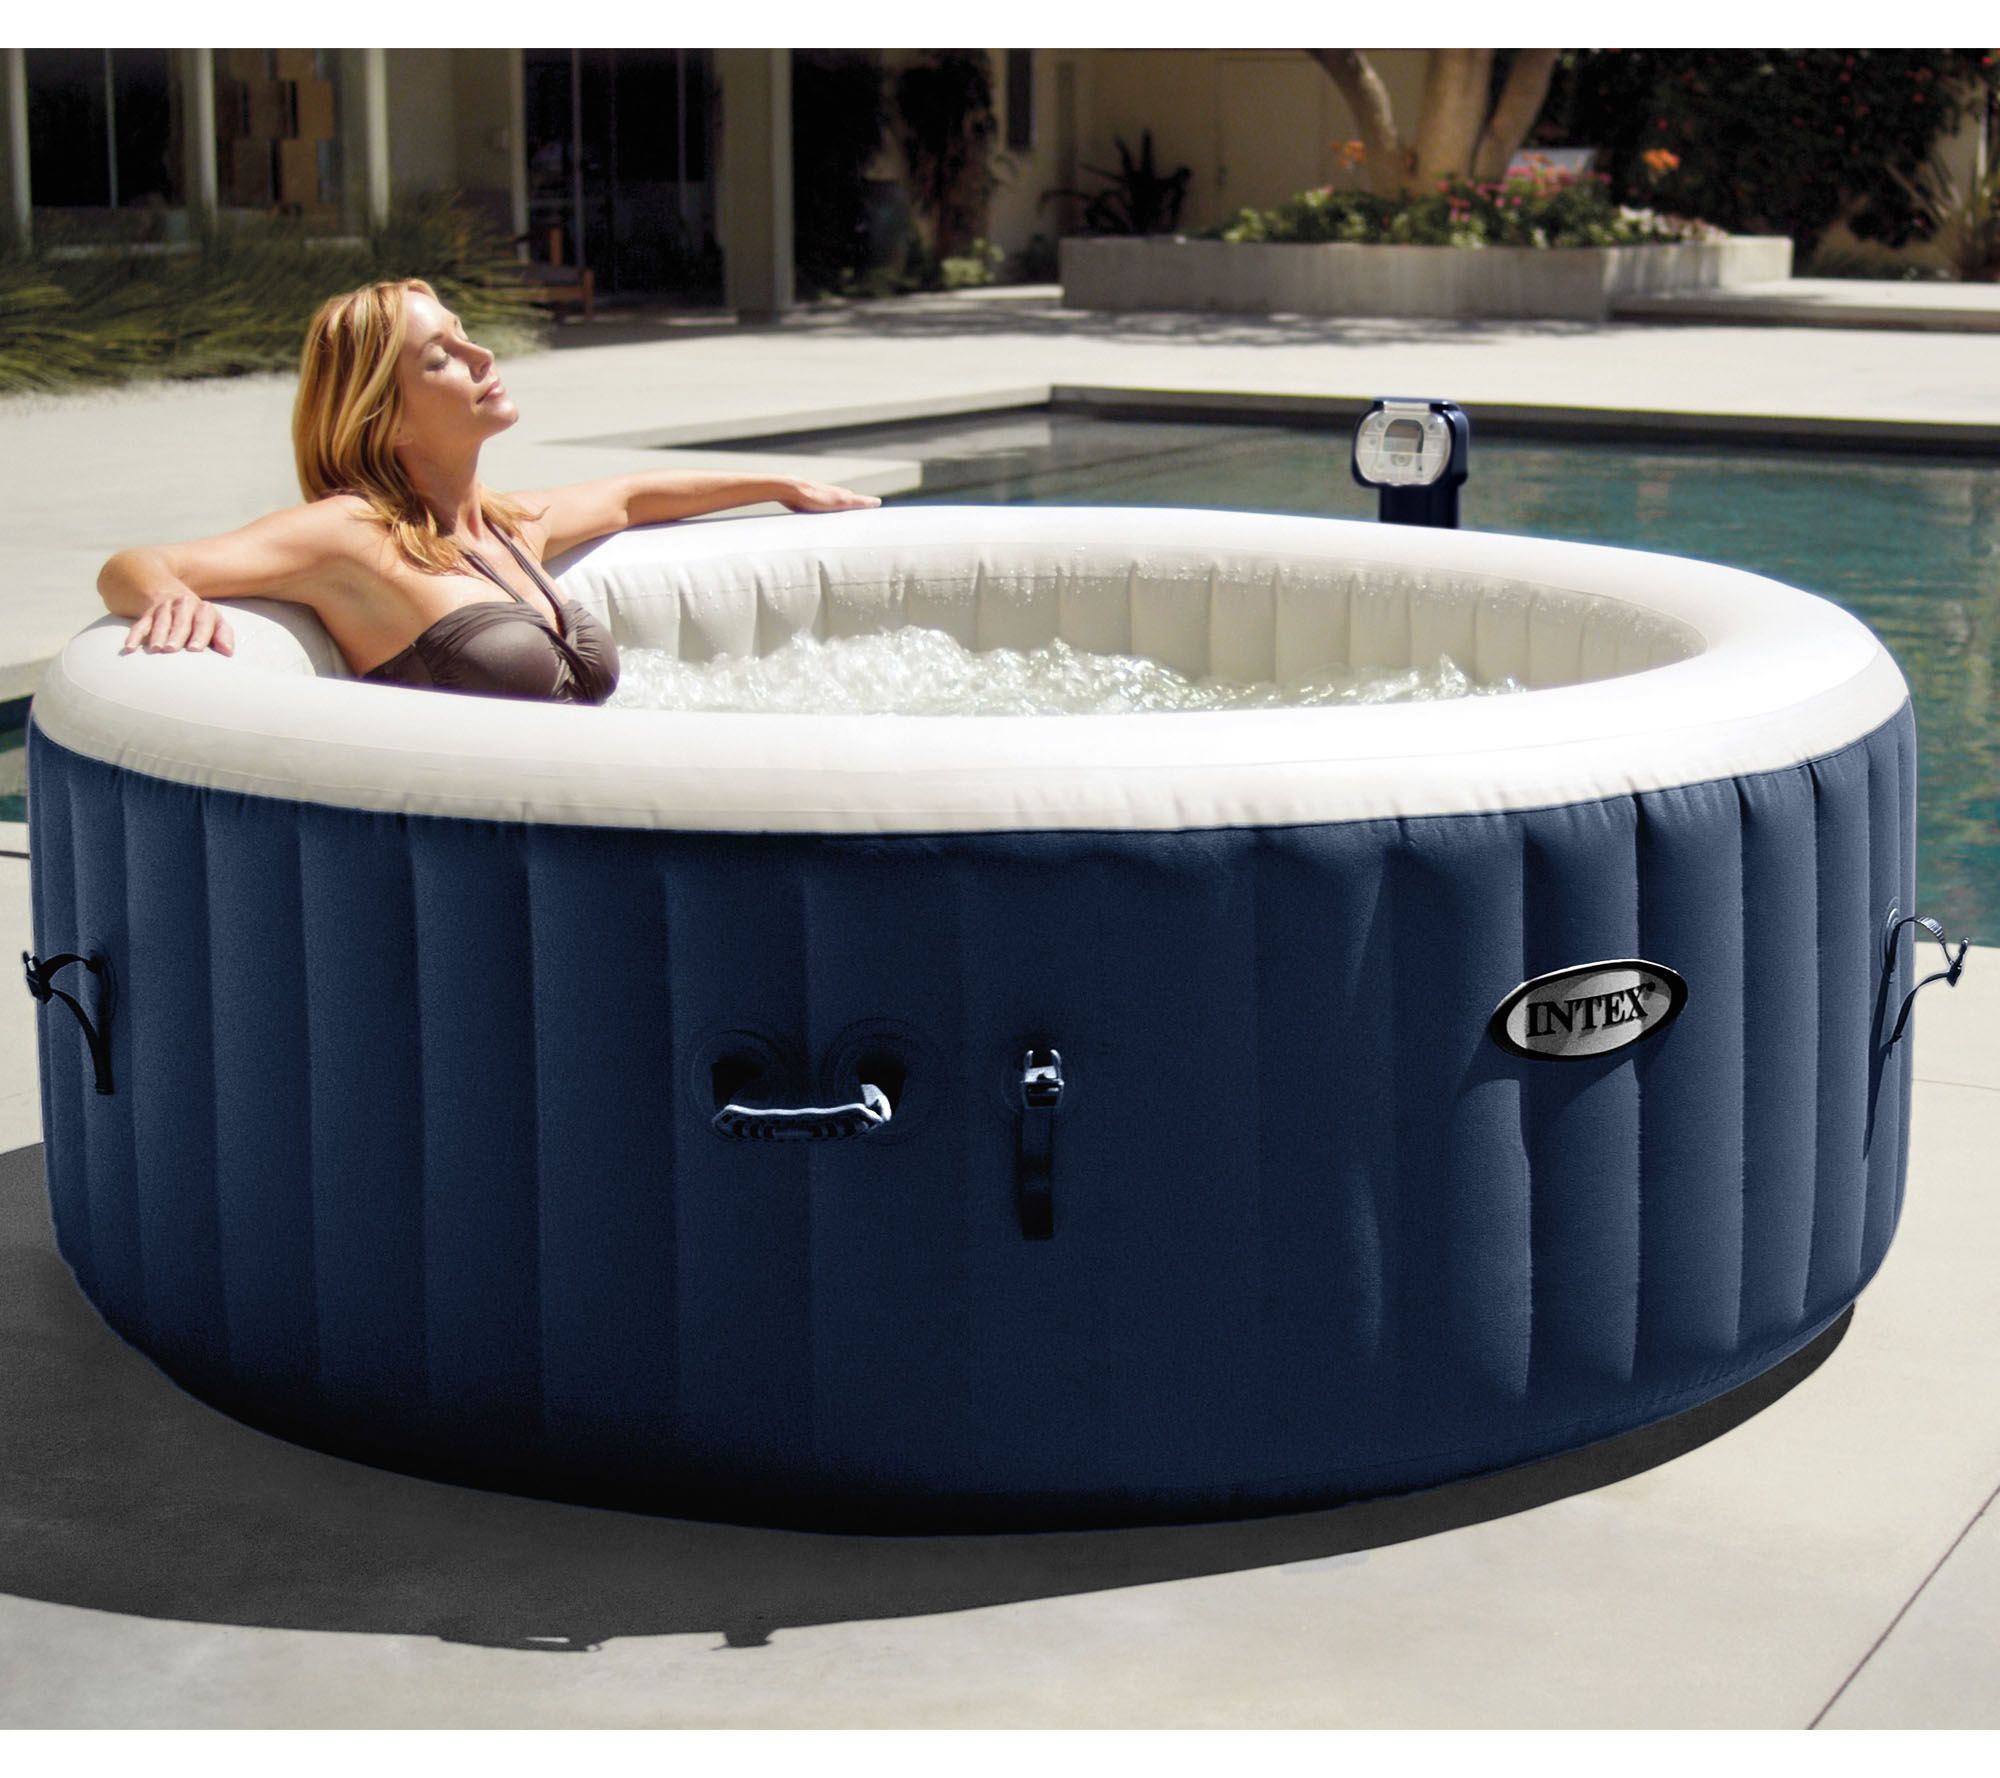 Intex Pure Spa Portable Hot Tub W Headrests And Extra Filters